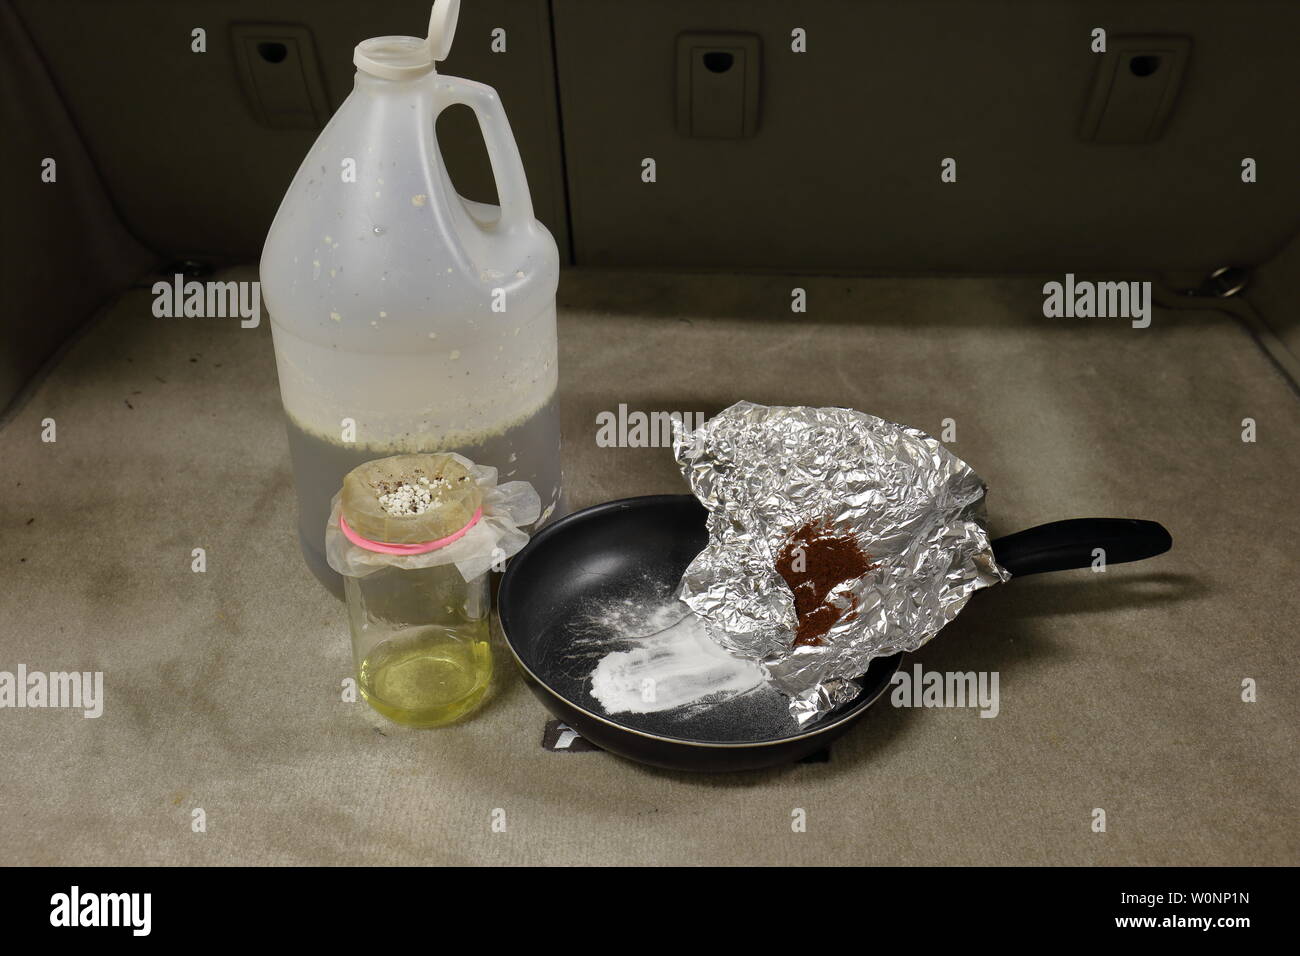 Supplies and chemicals used to manufacture methamphetamine in the back of a vehicle; illustrates the 'shake-n-bake' method Stock Photo